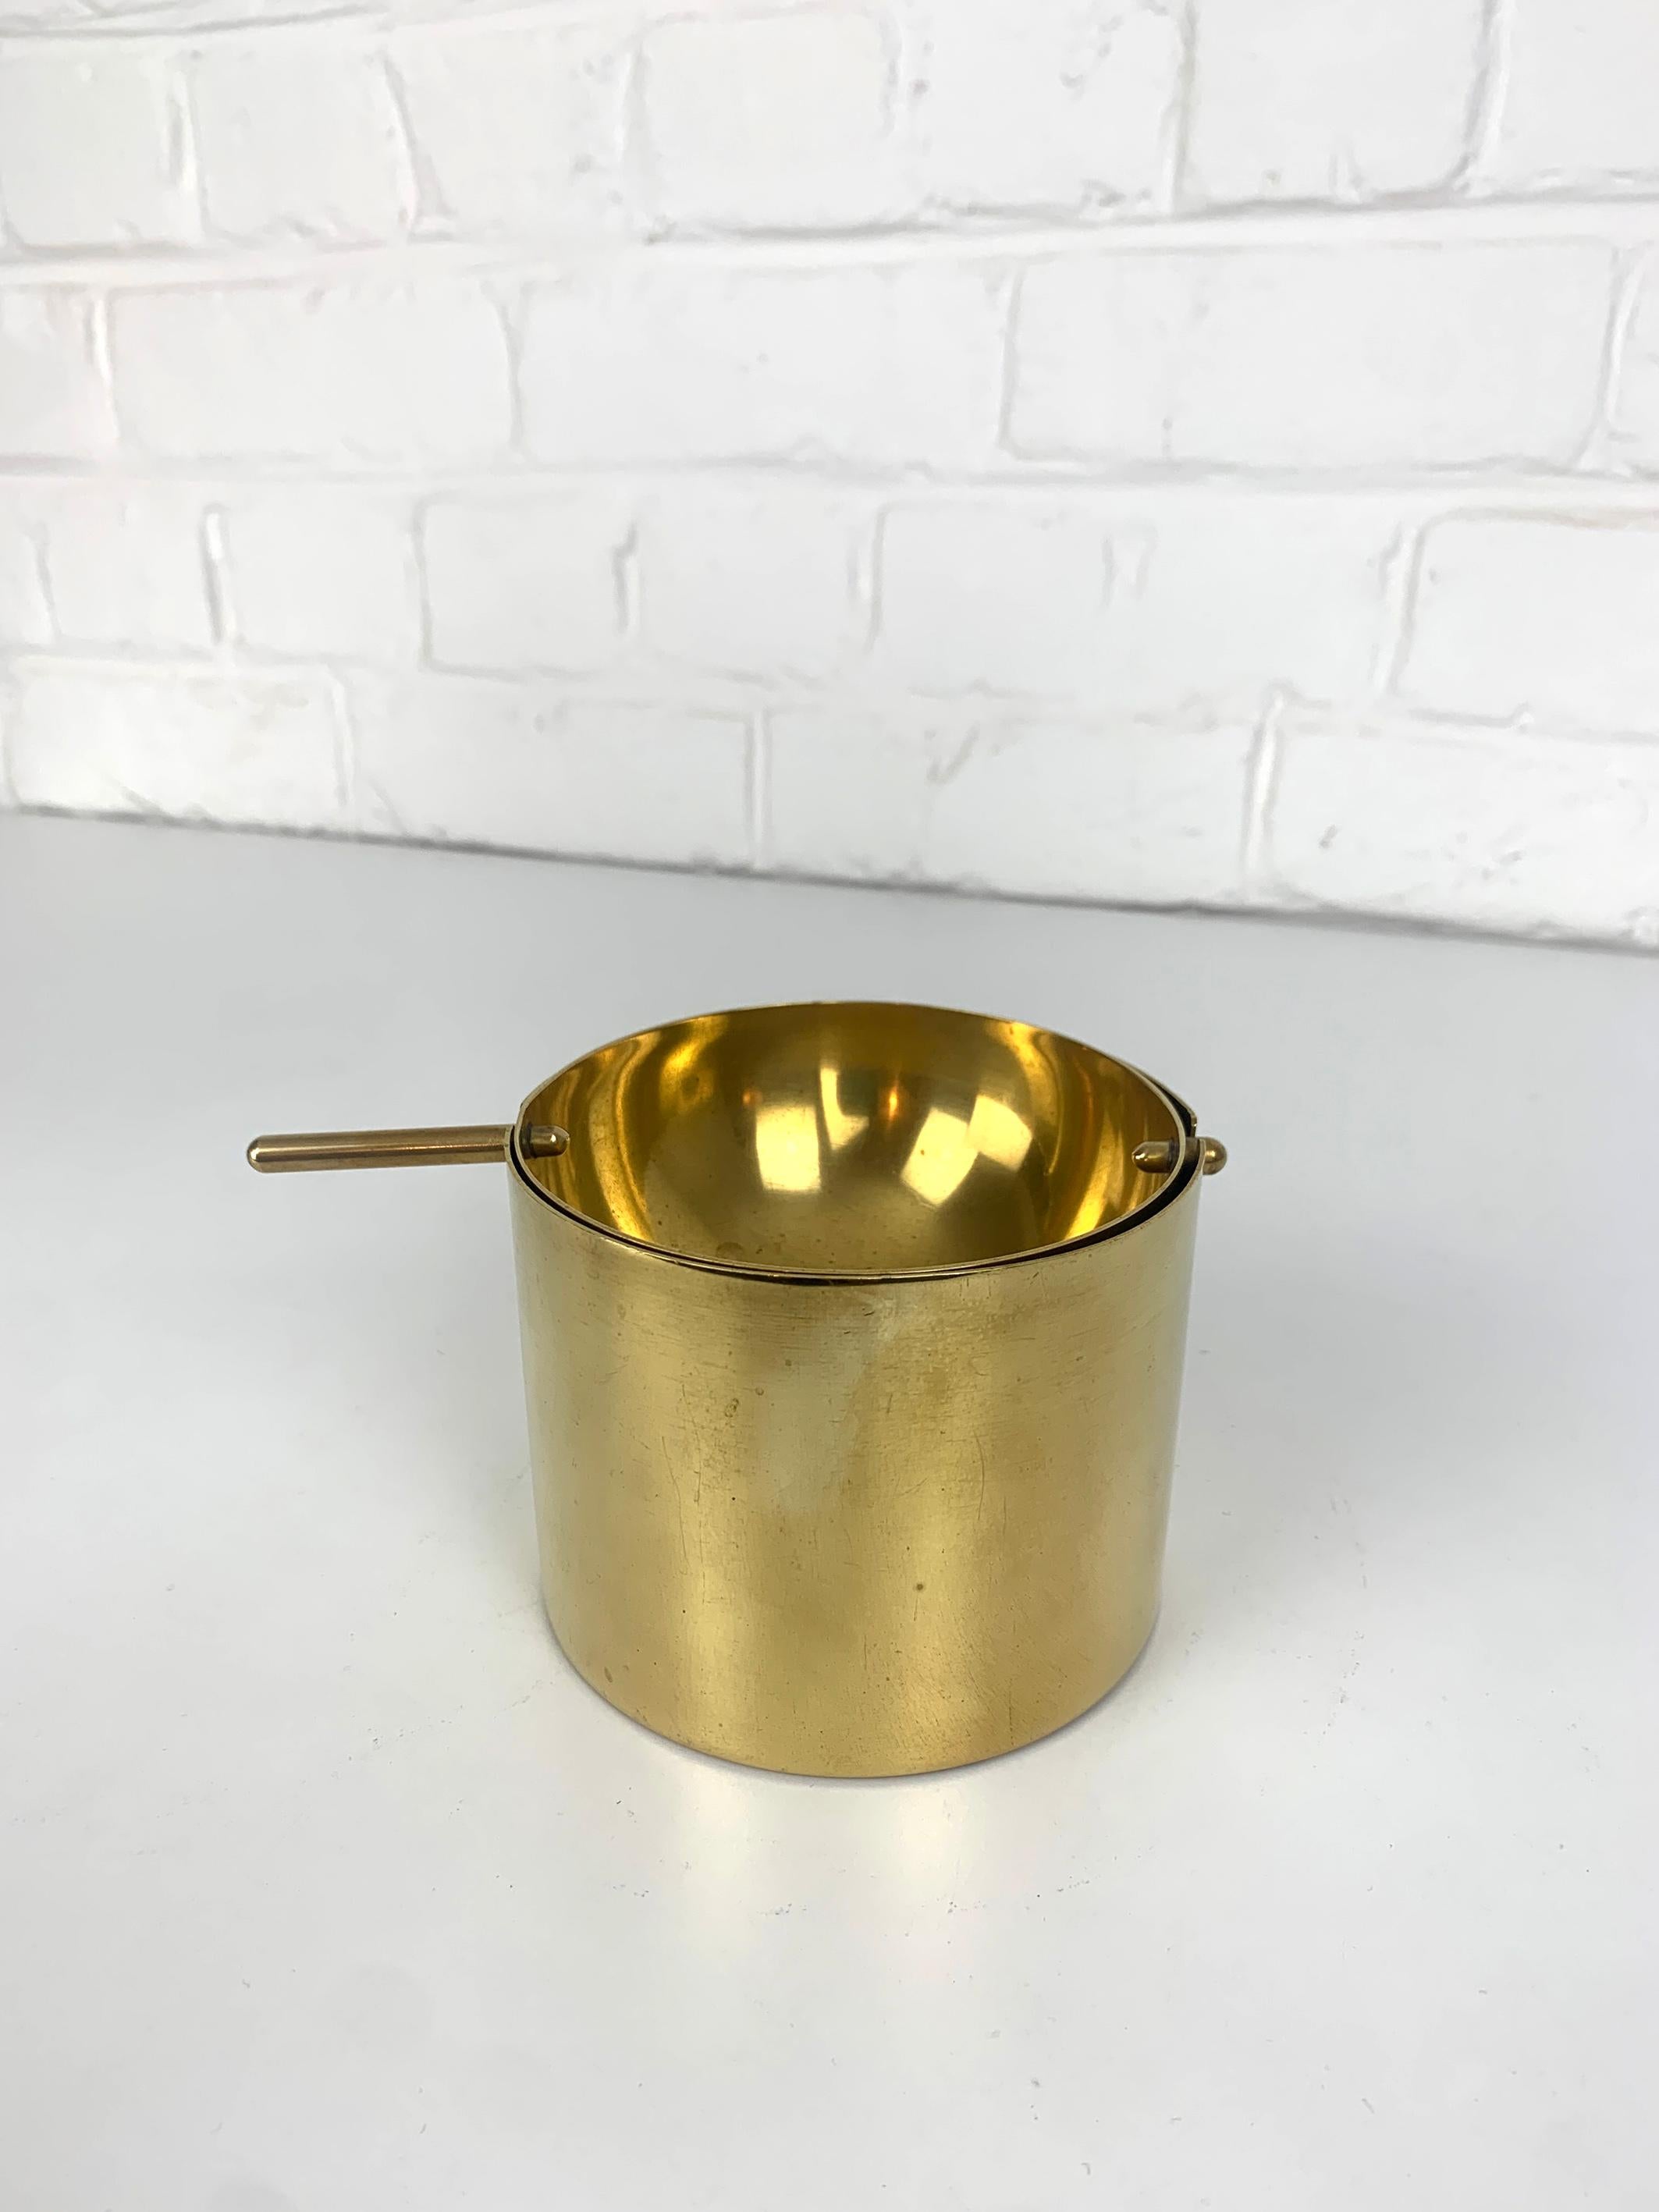 Large Cylinda-line ashtray in Brass. Iconic creation by Danish designer Arne Jacobsen for Stelton Brassware. 

The large version or Cigar ashtray, is the rarest of the two existing sizes. Diameter 4 inches (10 cm).

The brassware line was only